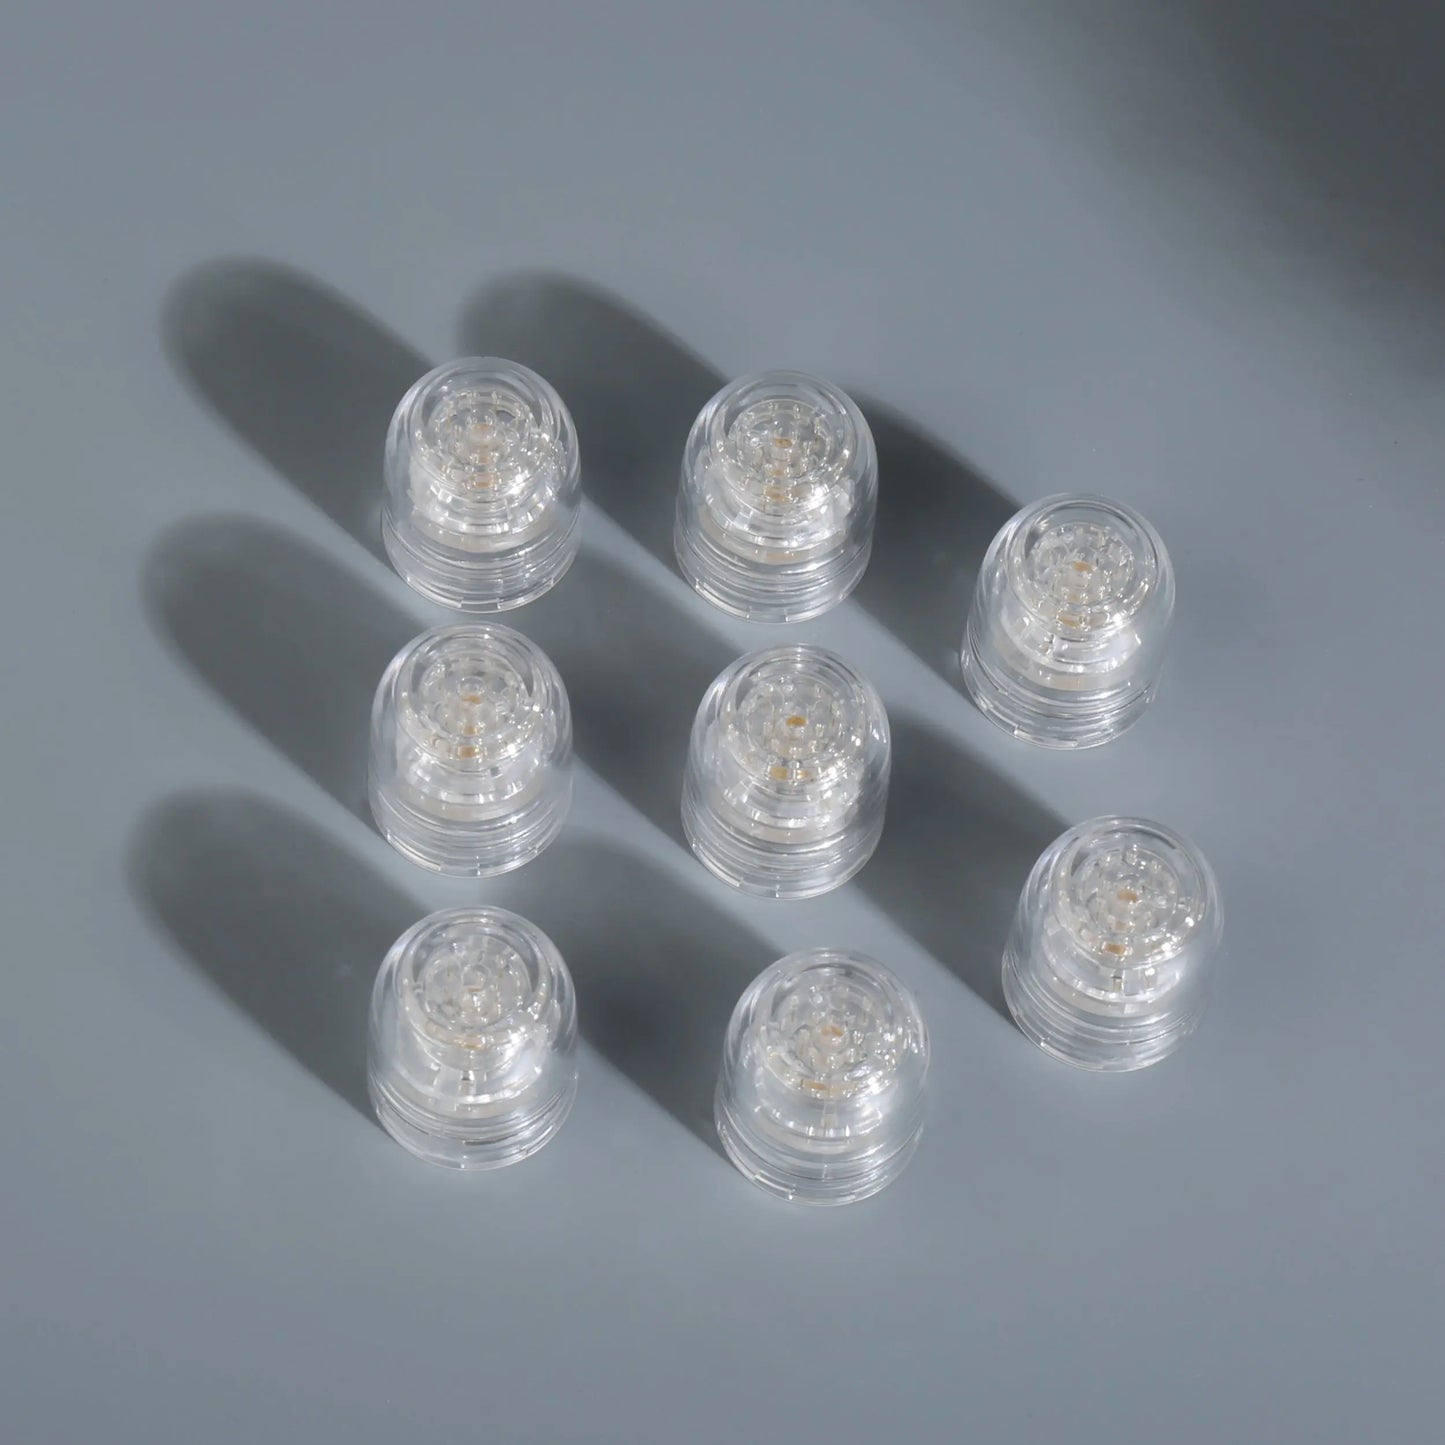 Sterile Disposable 0.5mm Needle Heads Glov Beauty